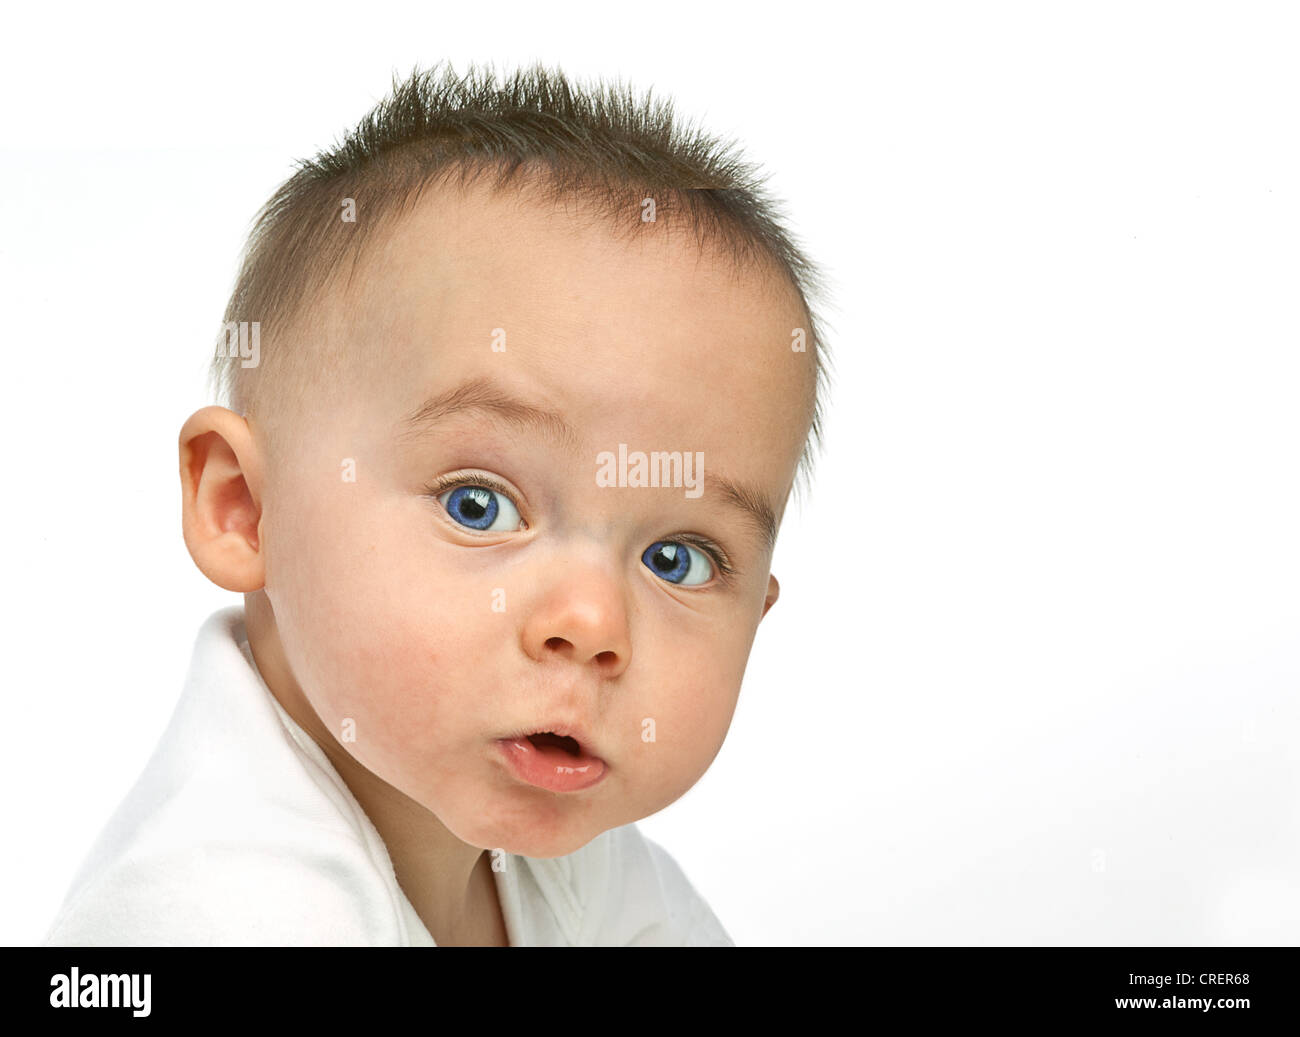 8 month old baby boy with spiky hair and a challenging expression, dressed  in a white vest Stock Photo - Alamy